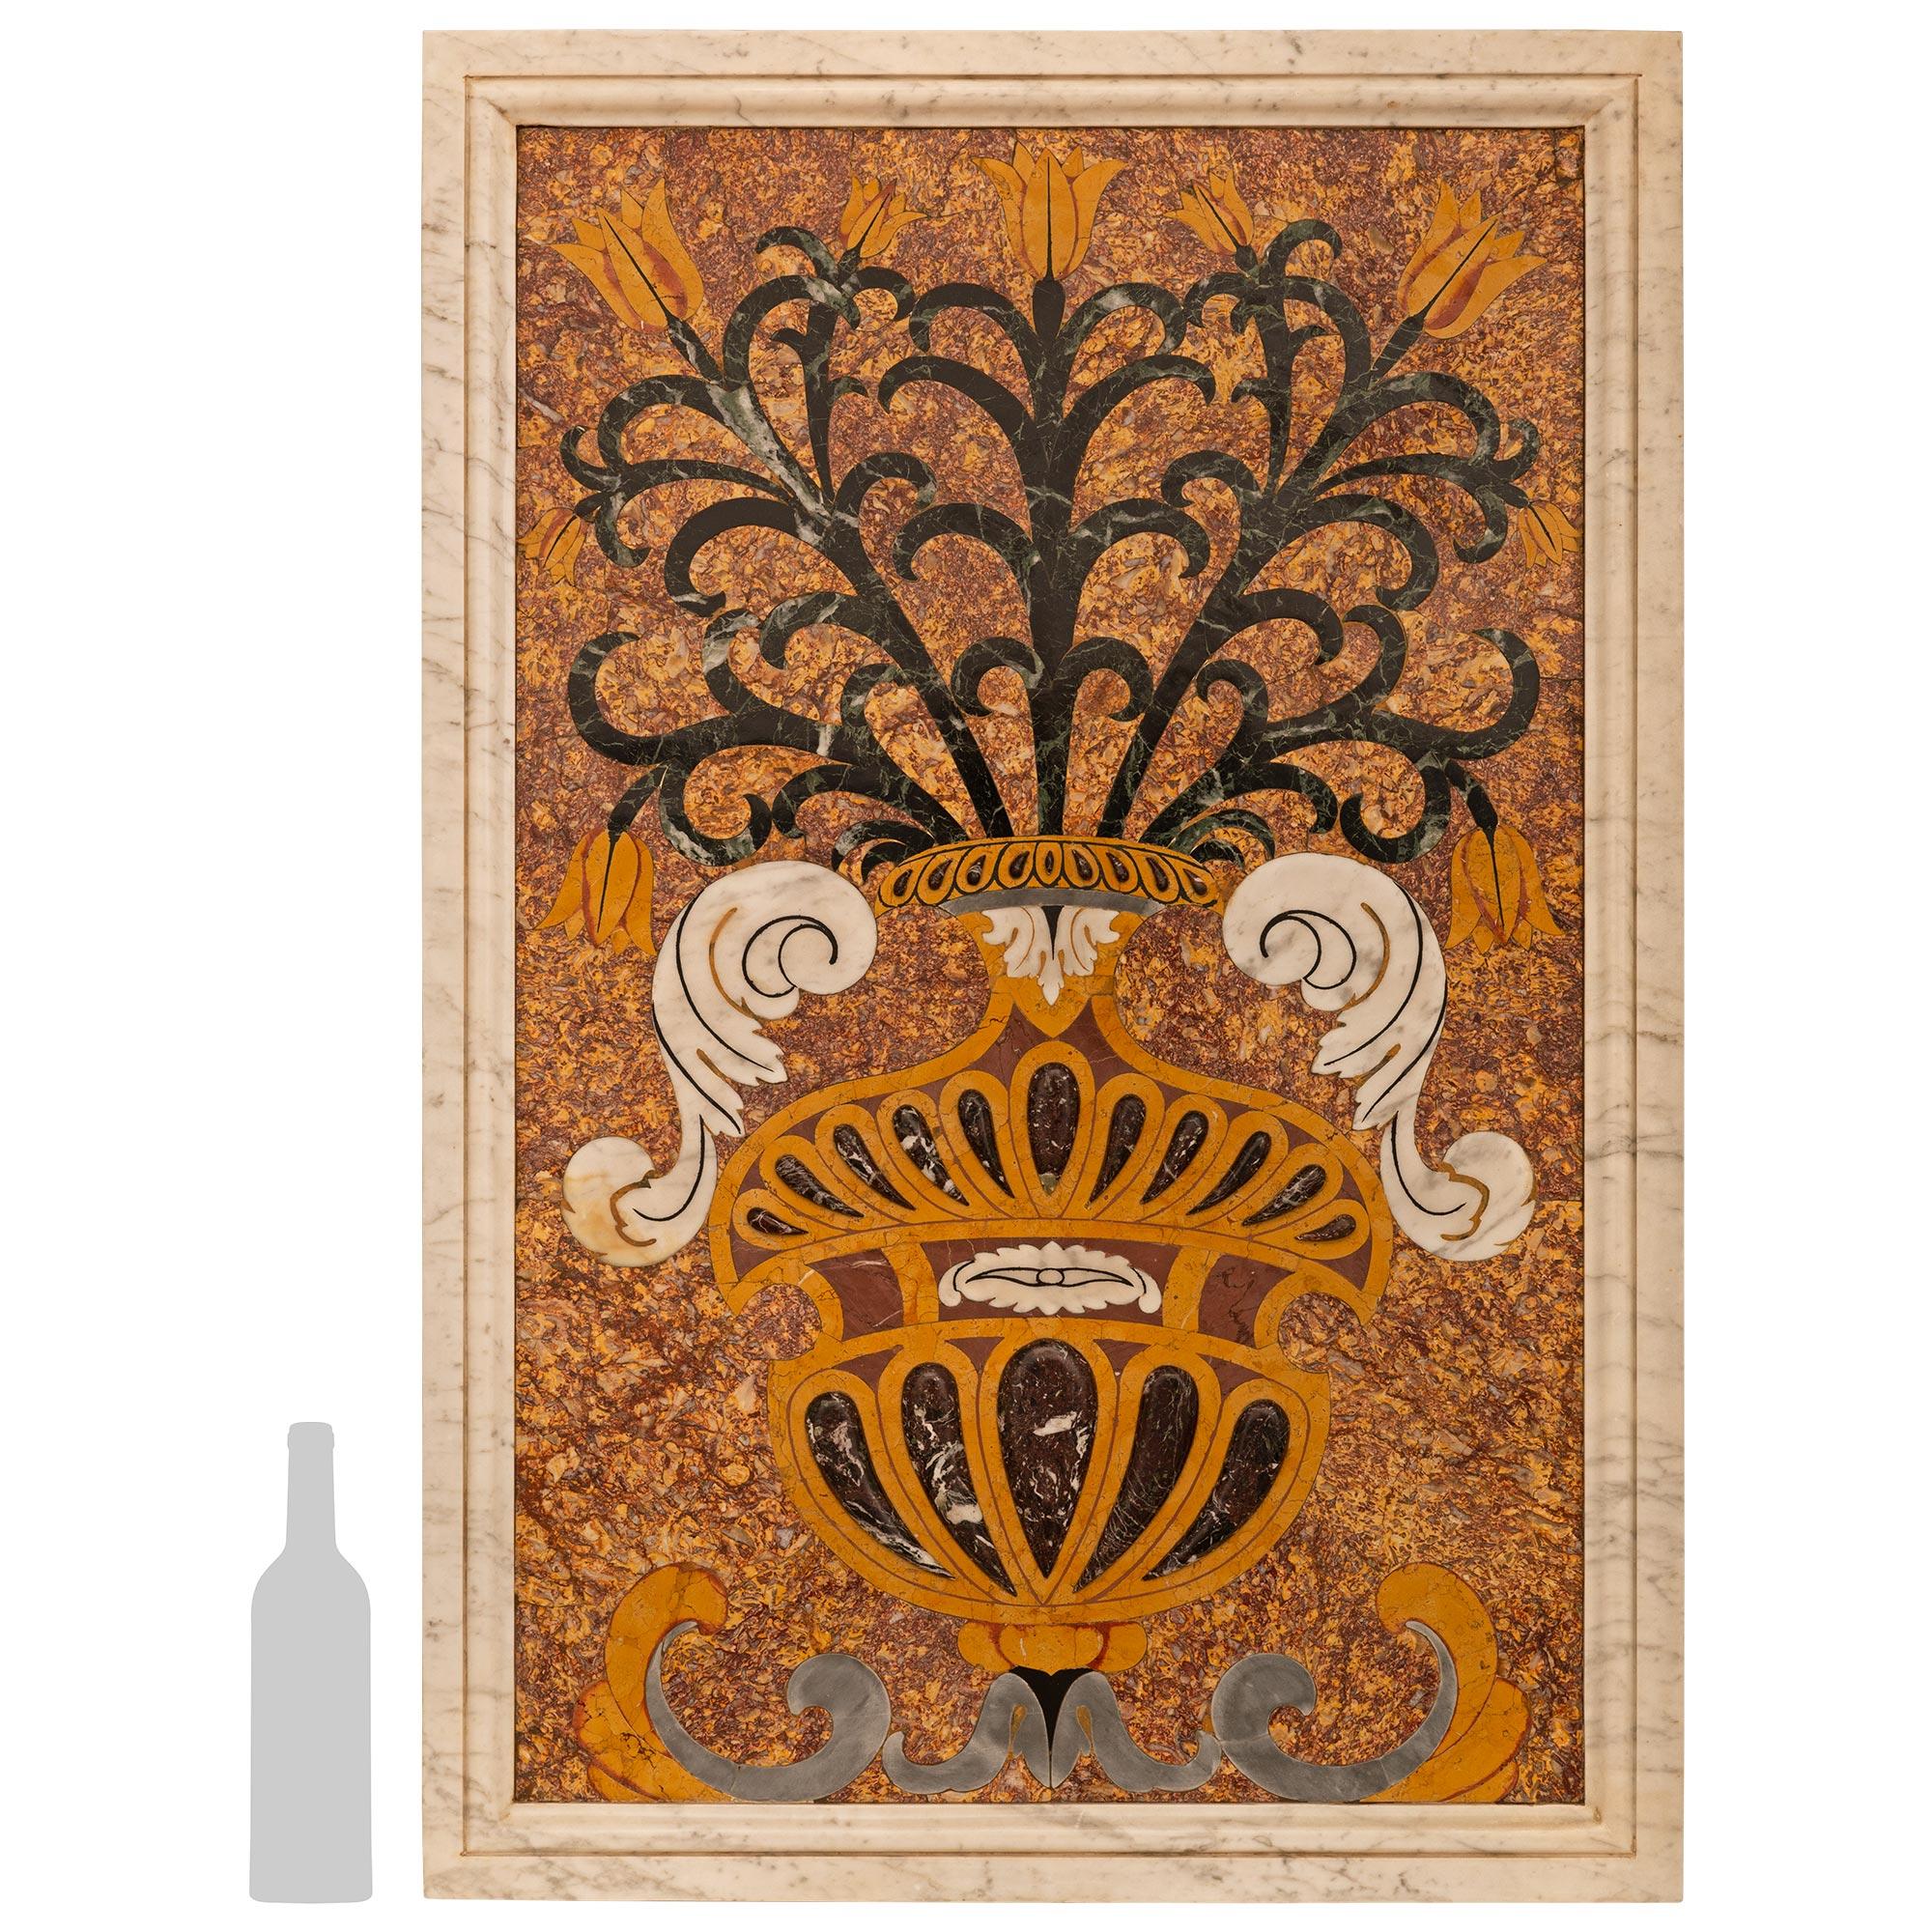 A sensational and large scale Italian 19th century Pietra Dura marble plaque/wall decor. This stunning plaque is set on a Brocatelle d'Espagne marble background set within a mottled white Carrara marble frame. The plaque displays exceptional